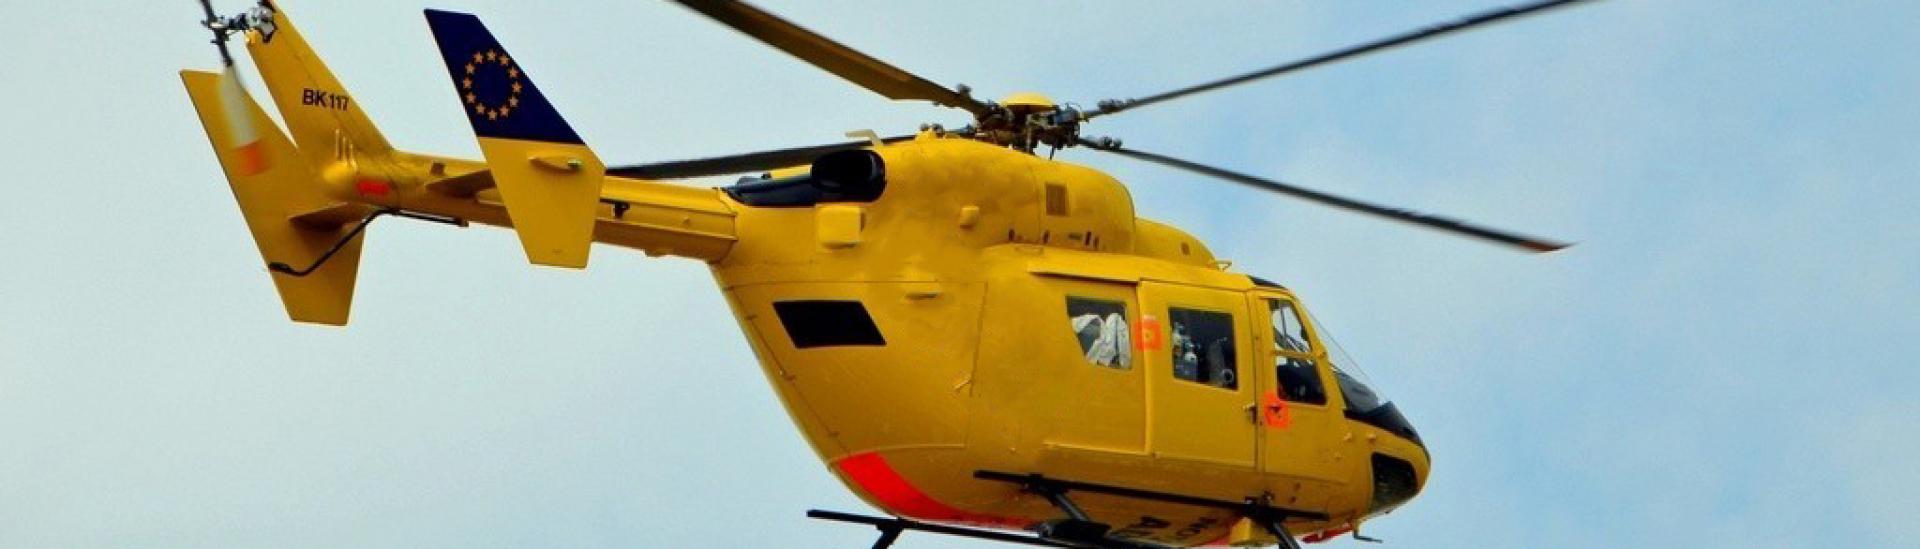 airwork helicopters for sale and lease.  bk117,as350, as355